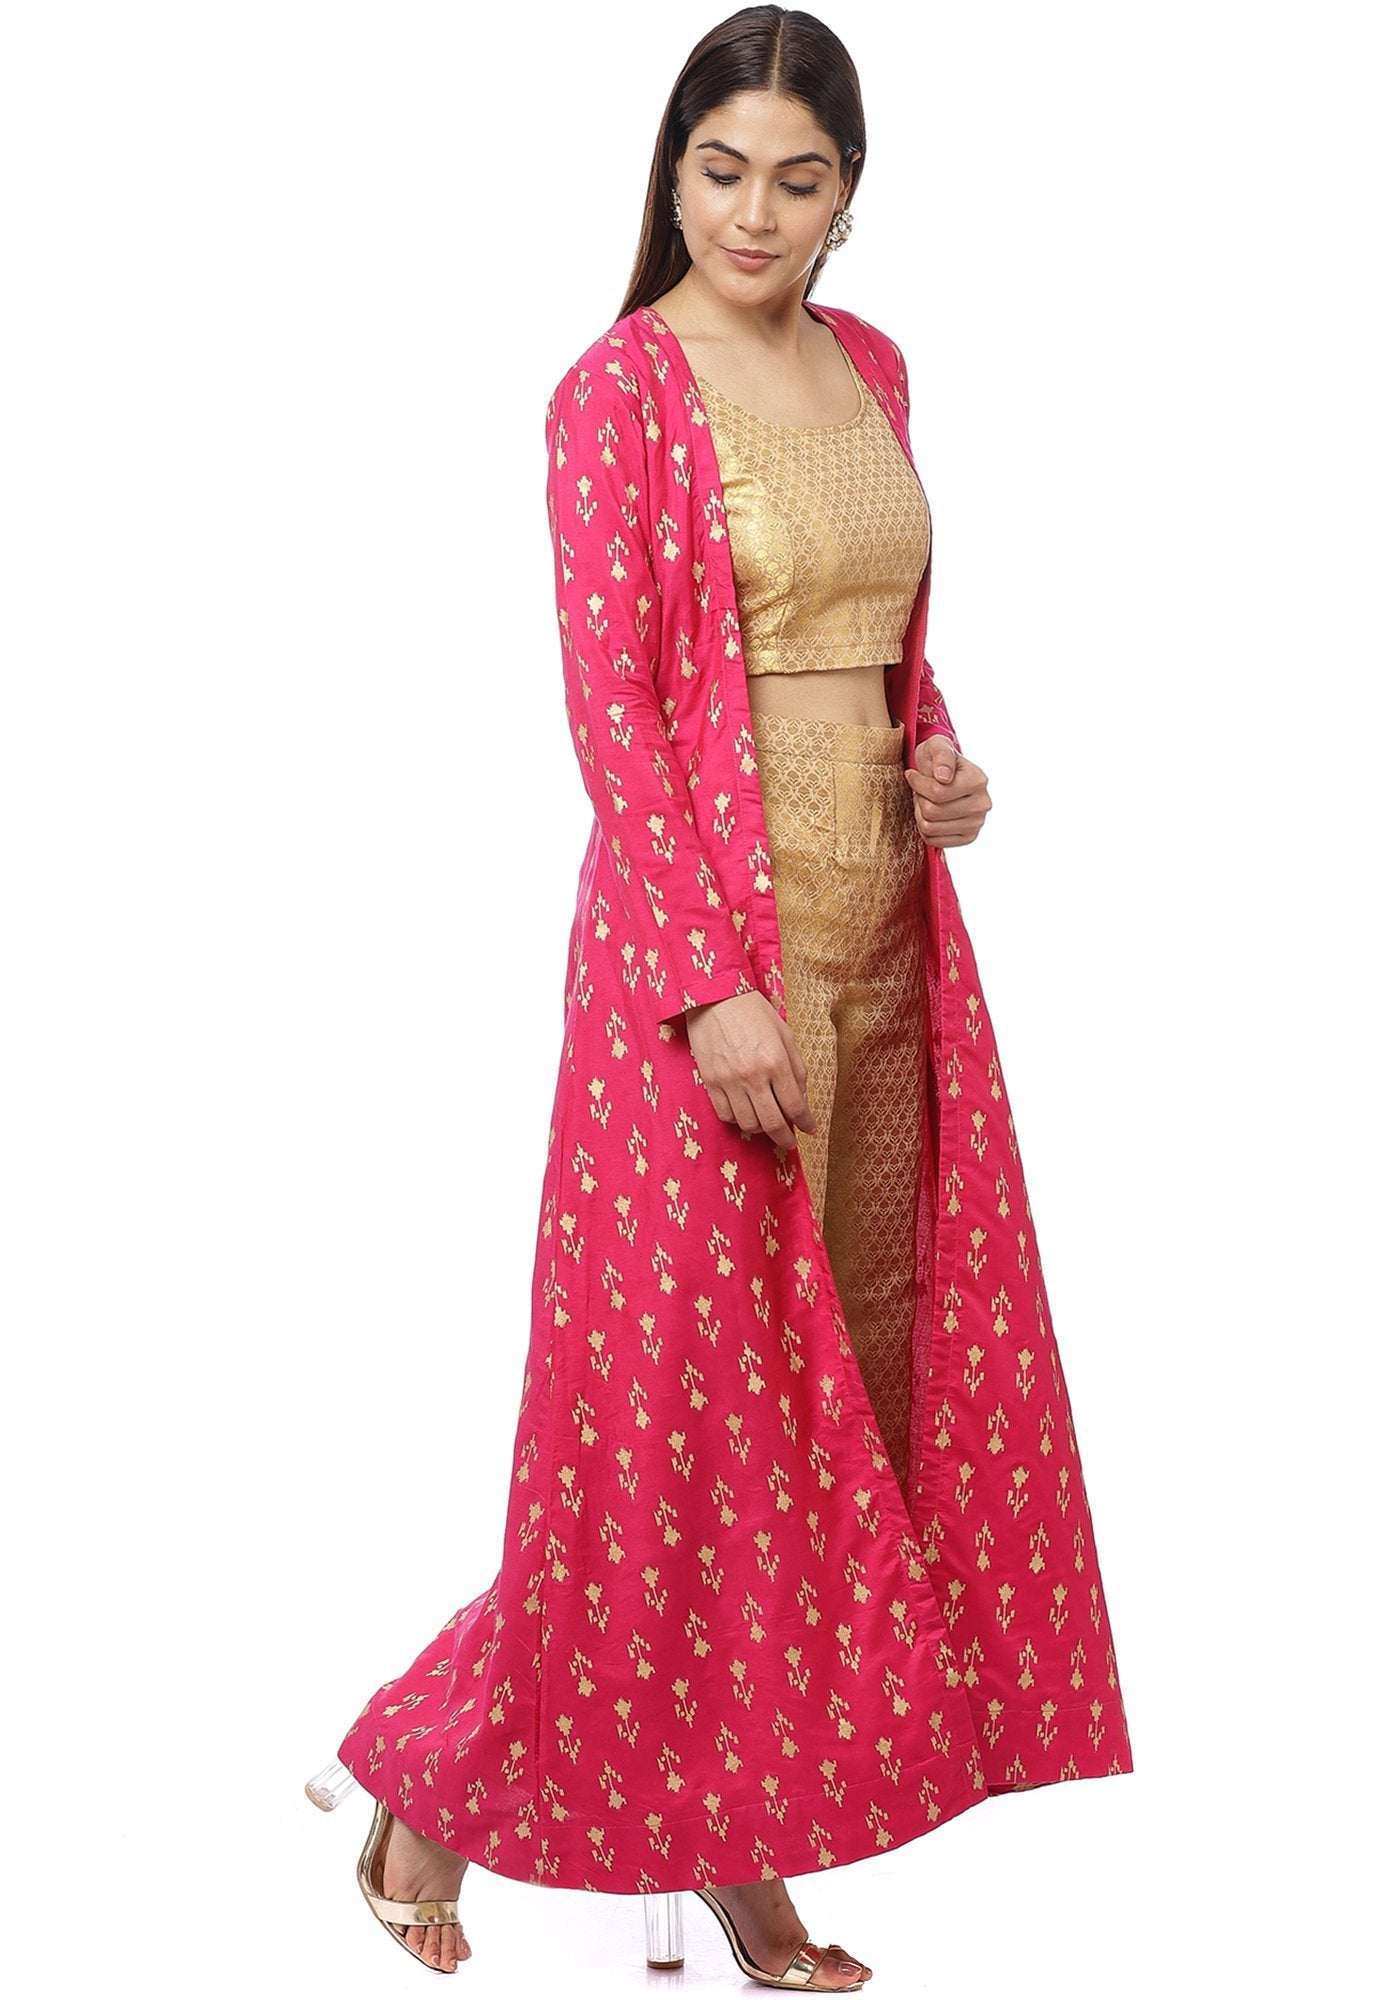 The India Style Women Kurtis with Golden Printed Jacket